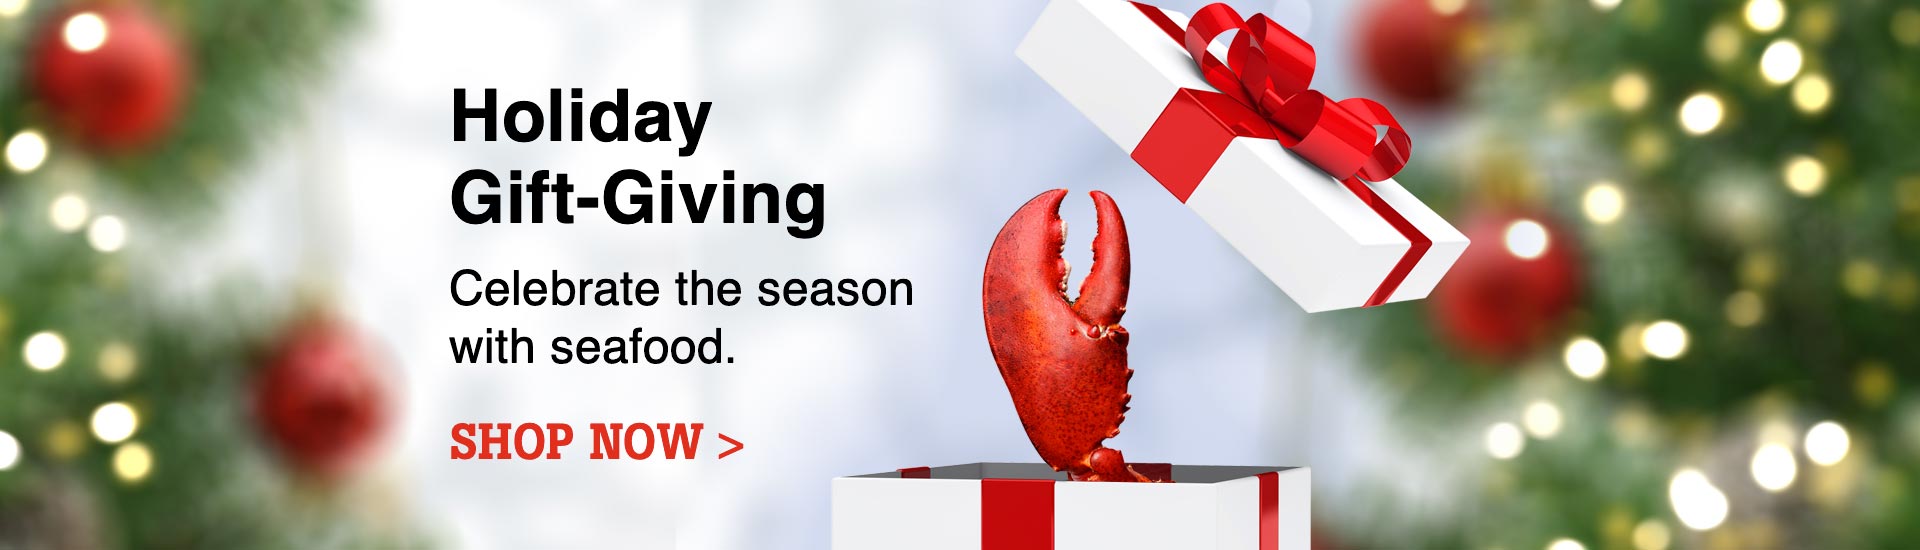 Holiday Gift Giving: Celebrate the Season with Seafood